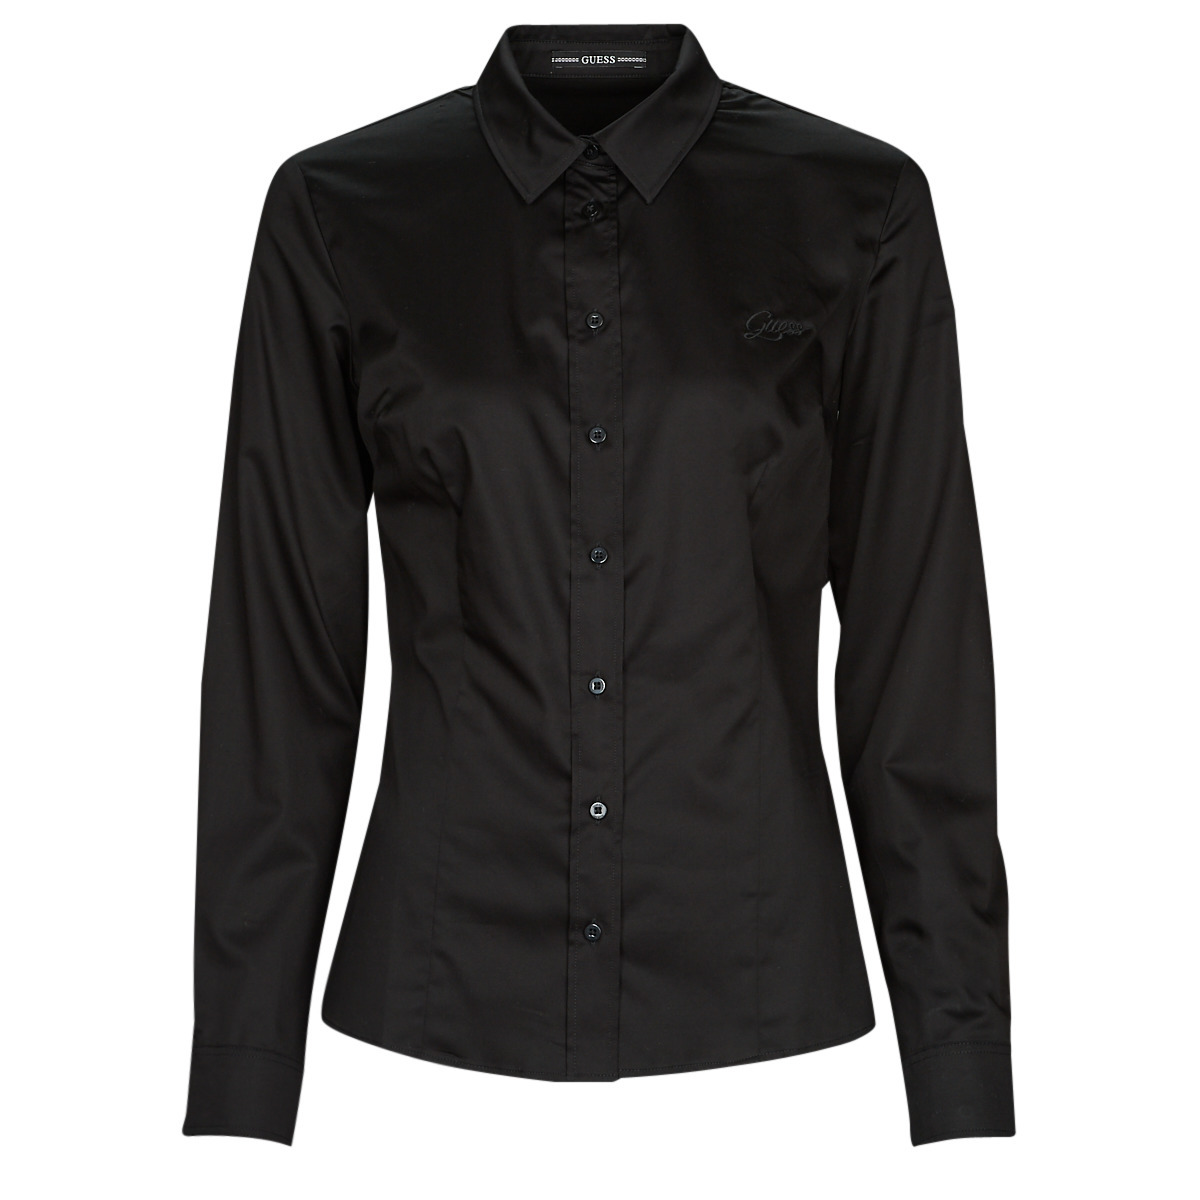 Guess Shirt in Black for Woman from Spartoo GOOFASH